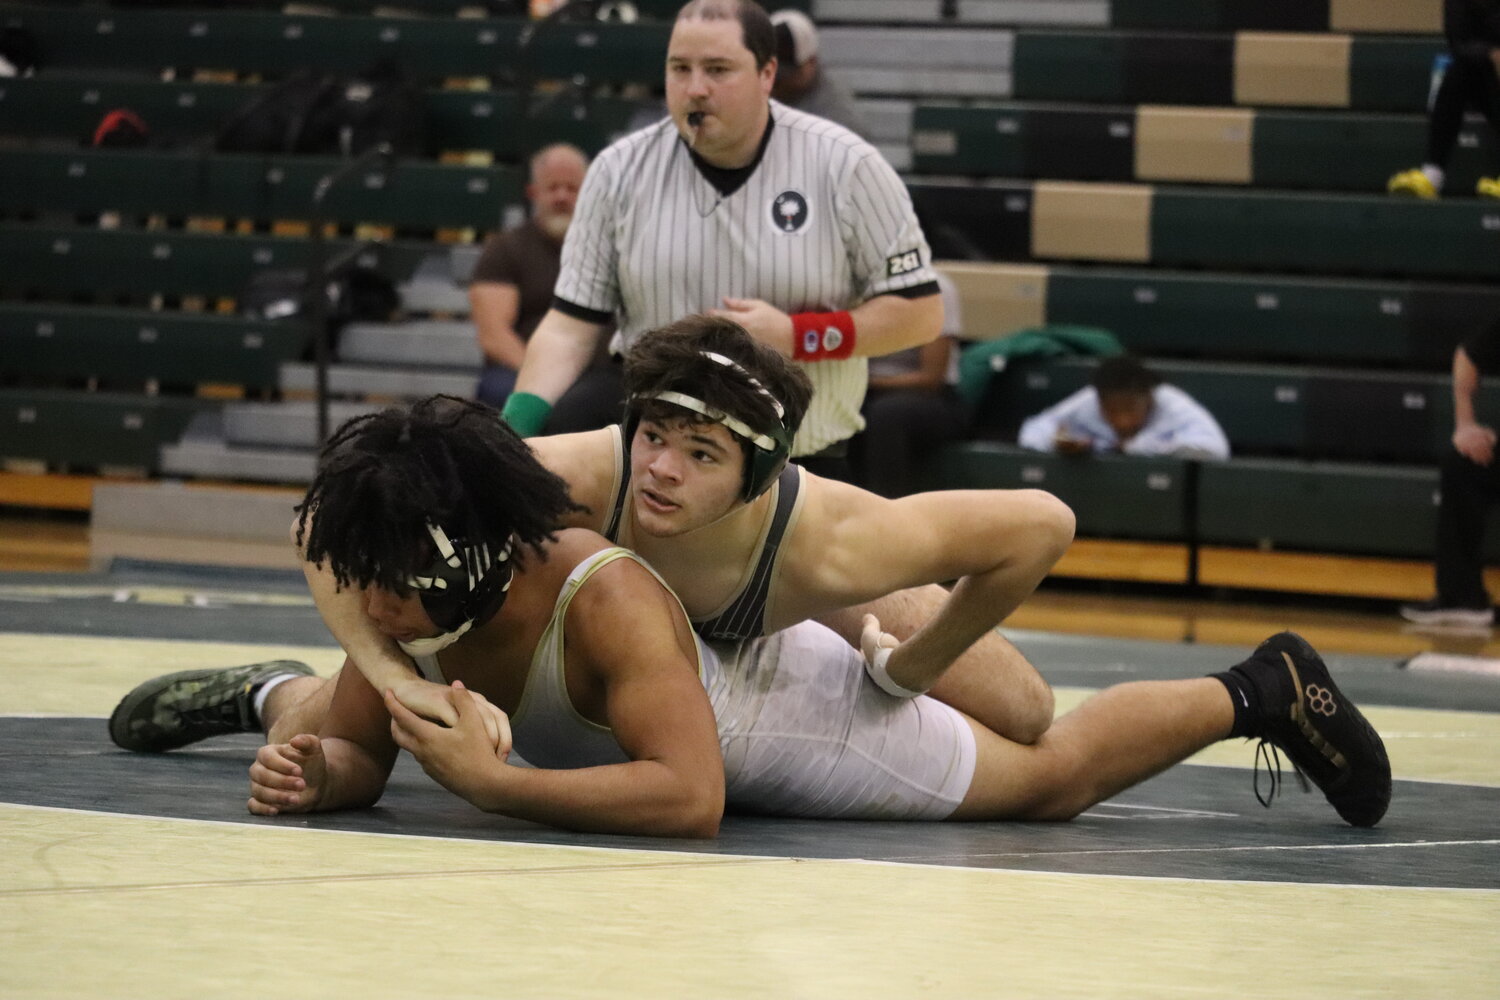 River Bluff advanced to the third round but lost on its home mat to Goose Creek Monday.